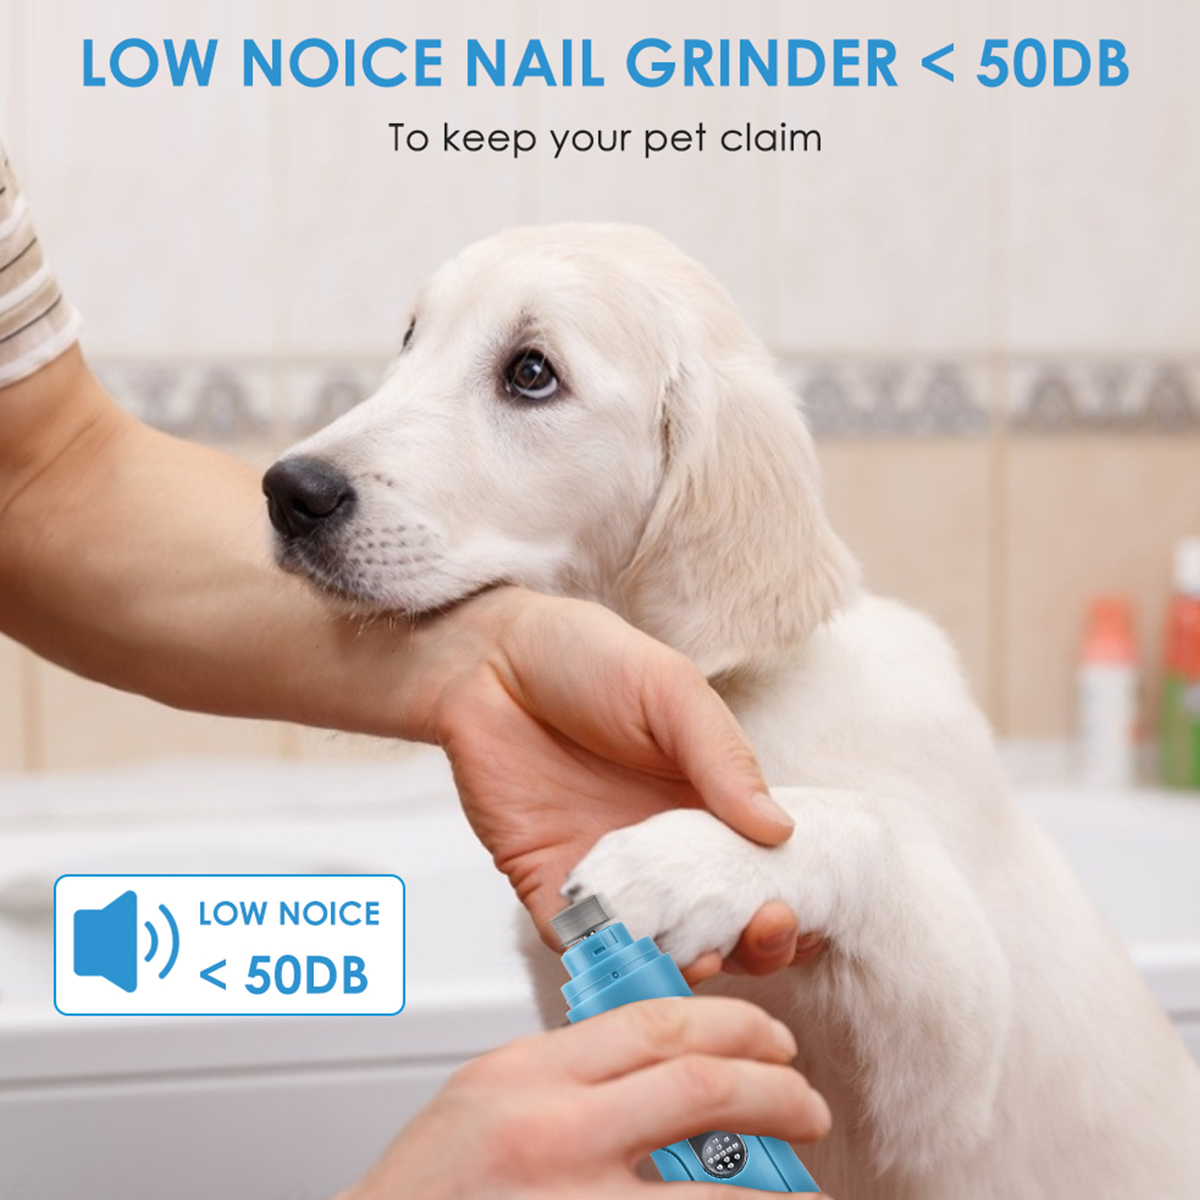 Dog-Nail-Grinder-3-Ports-Rechargeable-Low-Vibrations-Pet-Nail-Trimmer-1937723-3